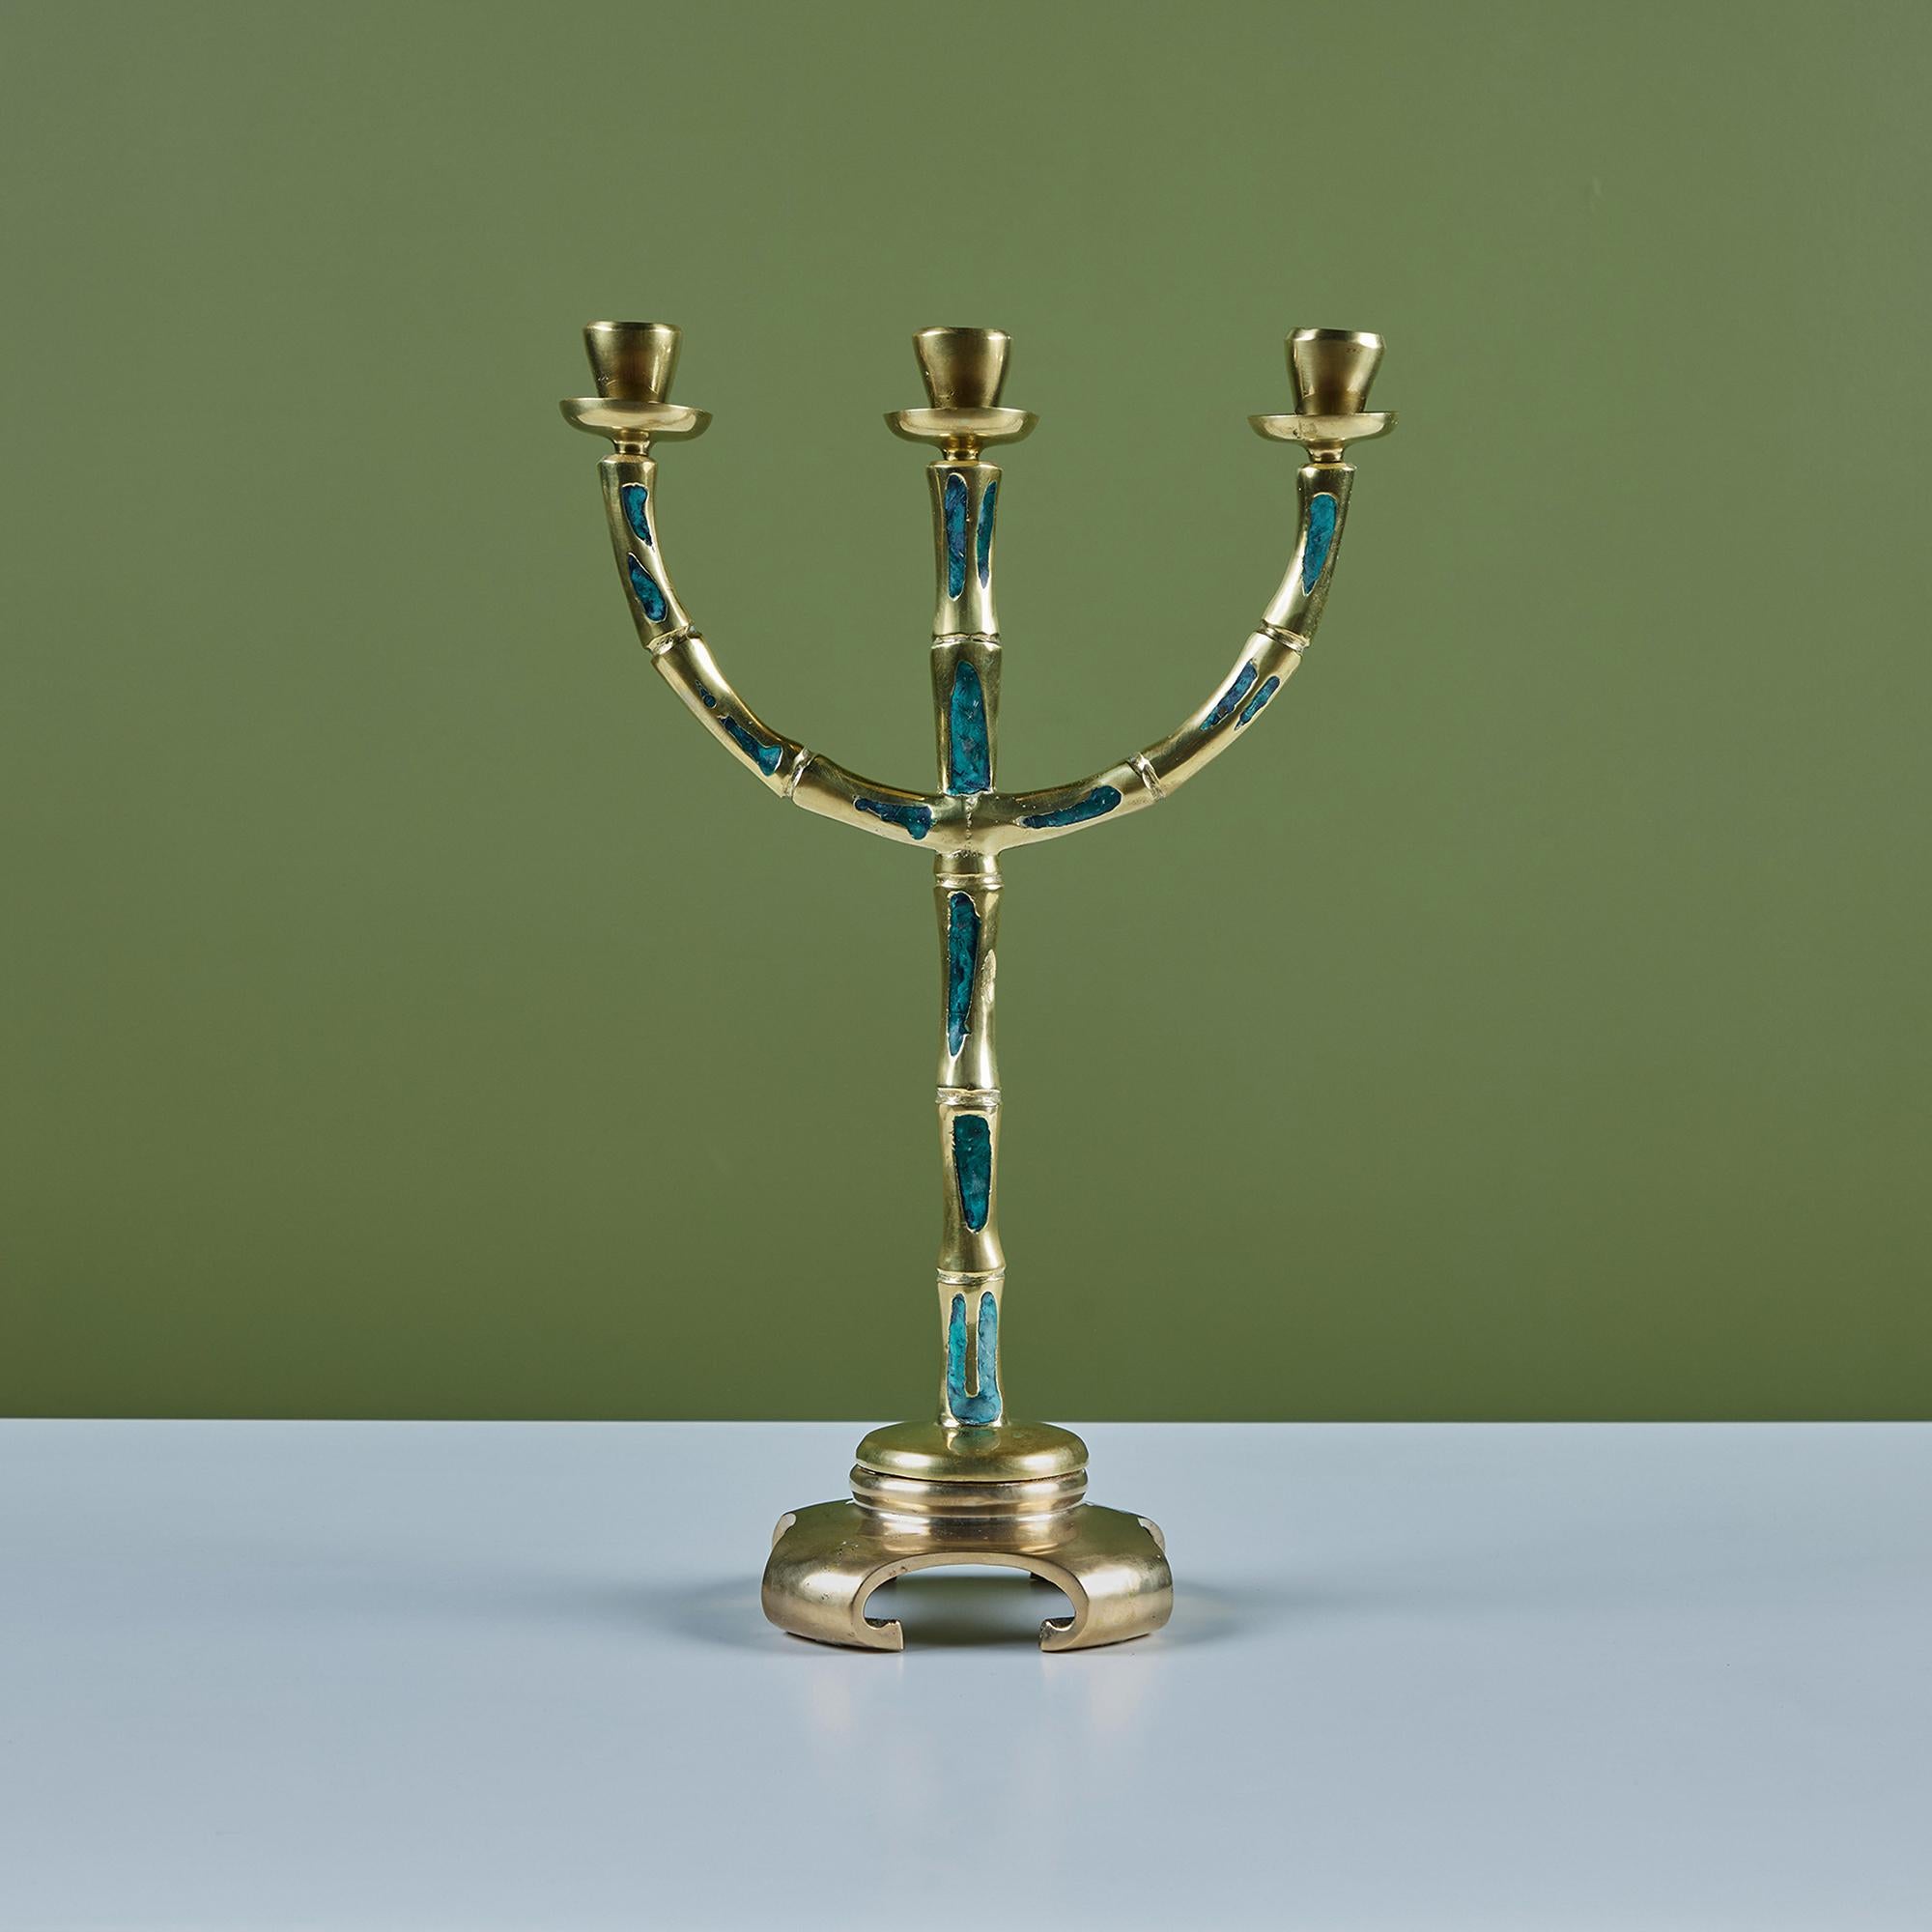 José Mendoza ran a foundry called Pepe Mendoza in the 1950s and 60s in Mexico City, manufacturing modernist home accessories using a modified cloisonné technique more suited to the tastes of the day. This brass candelabra features three arms and the